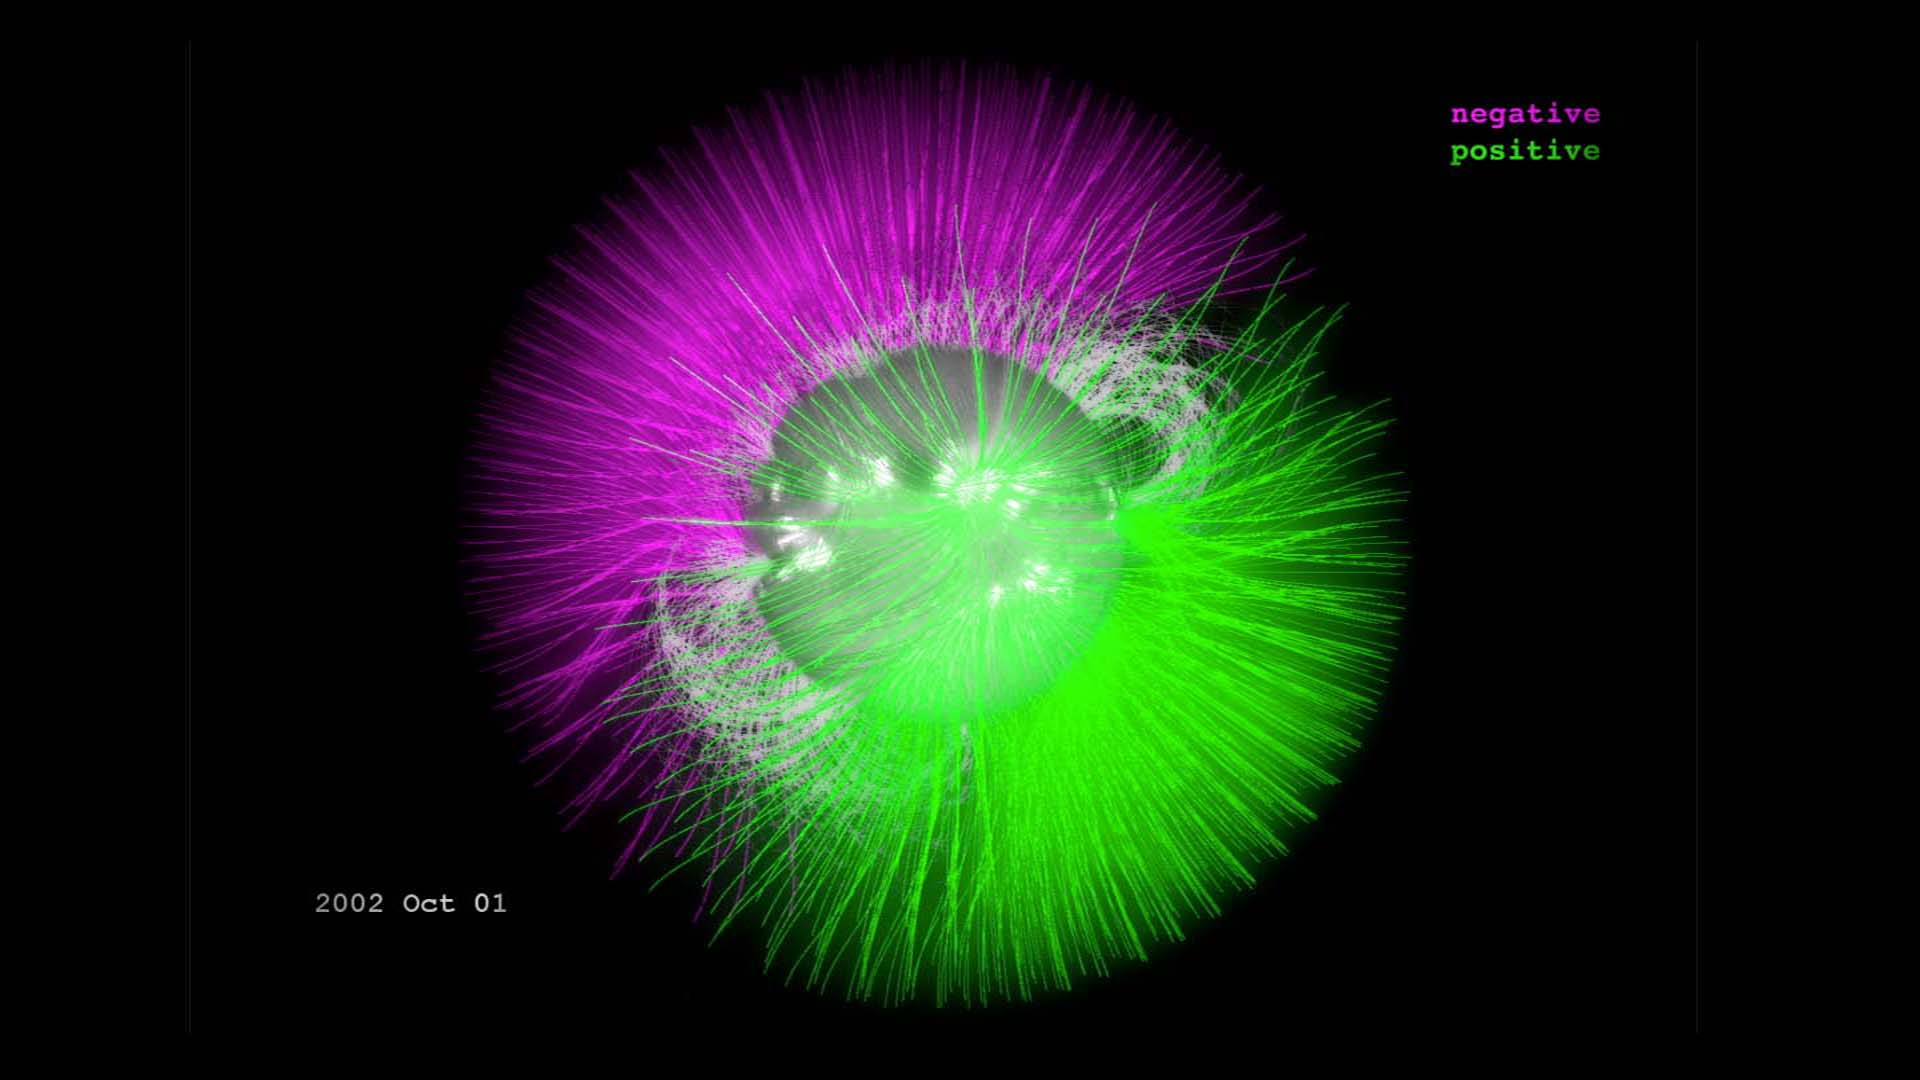 Watch this video on the NASA Goddard YouTube channel.This visualization shows the position of the sun's magnetic fields from January 1997 to December 2013. The field lines swarm with activity: The magenta lines show where the sun's overall field is negative and the green lines show where it is positive. Additional gray lines represent areas of local magnetic variation. The entire sun's magnetic polarity, flips approximately every 11 years – though sometimes it takes quite a bit longer – and defines what's known as the solar cycle. The visualization shows how in 1997, the sun shows the positive polarity on the top, and the negative polarity on the bottom. Over the next 16 years, each set of lines is seen to creep toward the opposite pole. By the end of the movie, the flip is almost complete. At the height of each magnetic flip, the sun goes through periods of more solar activity, during which there are more sunspots, and more eruptive events such as solar flares and coronal mass ejections, or CMEs. The point in time with the most sunspots is called solar maximum. 